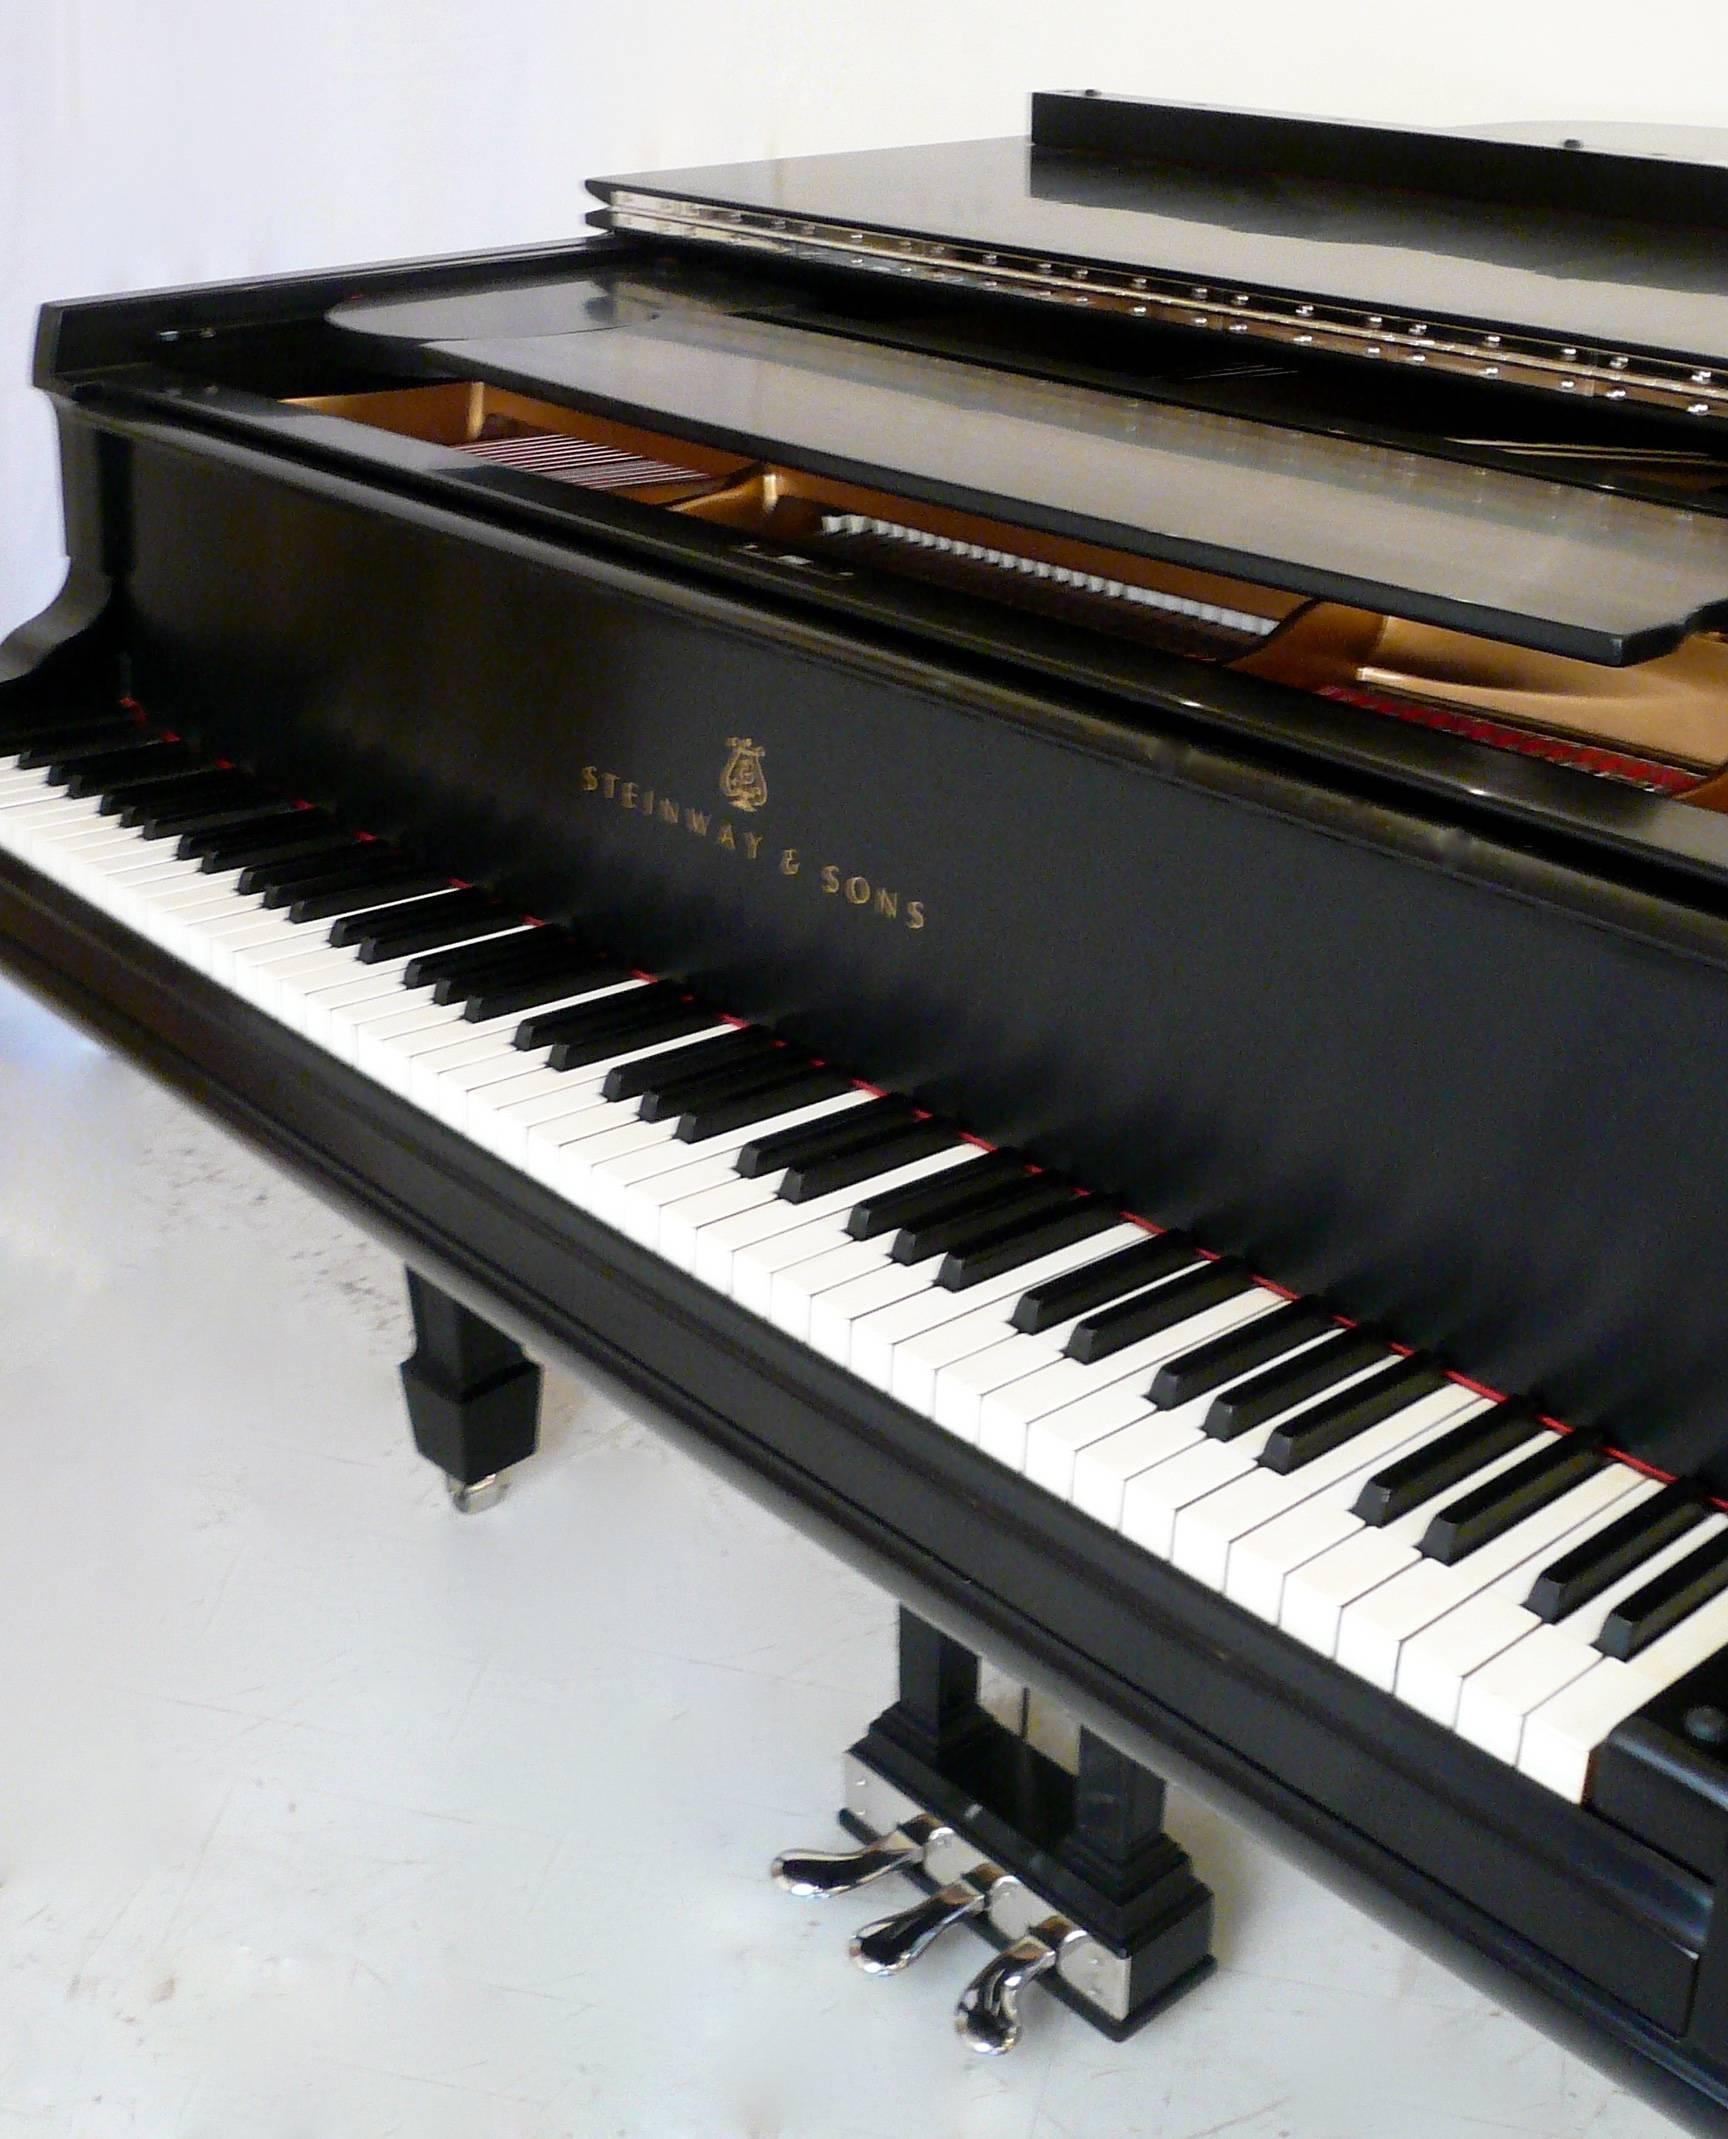 This concert quality vintage Steinway semi-concert grand piano has been totally restored, and is in like new condition.